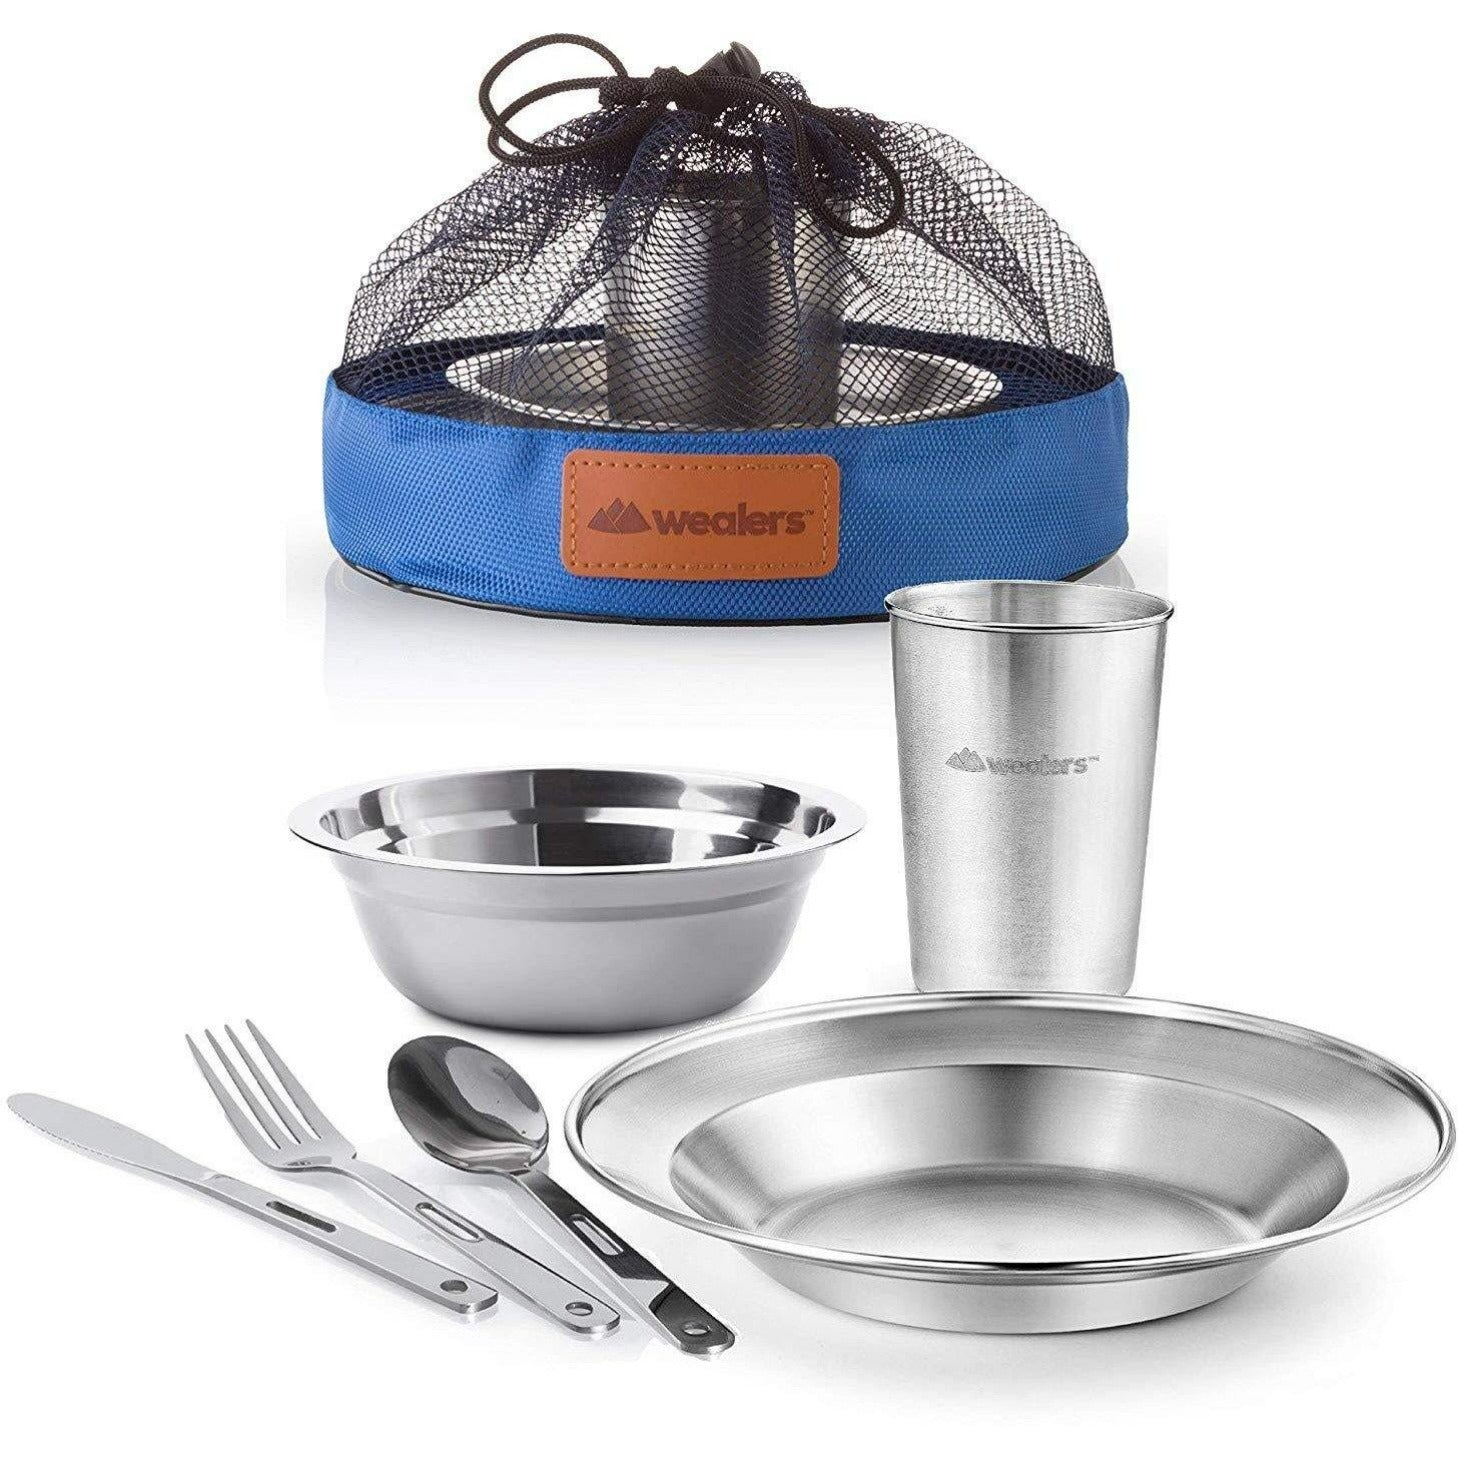 Wealers Stainless Steel Plates and Bowls Camping Set Small and Large  Dinnerware for Kids, Adults, Family | Camping, Hiking, Beach, Outdoor Use |  Incl.